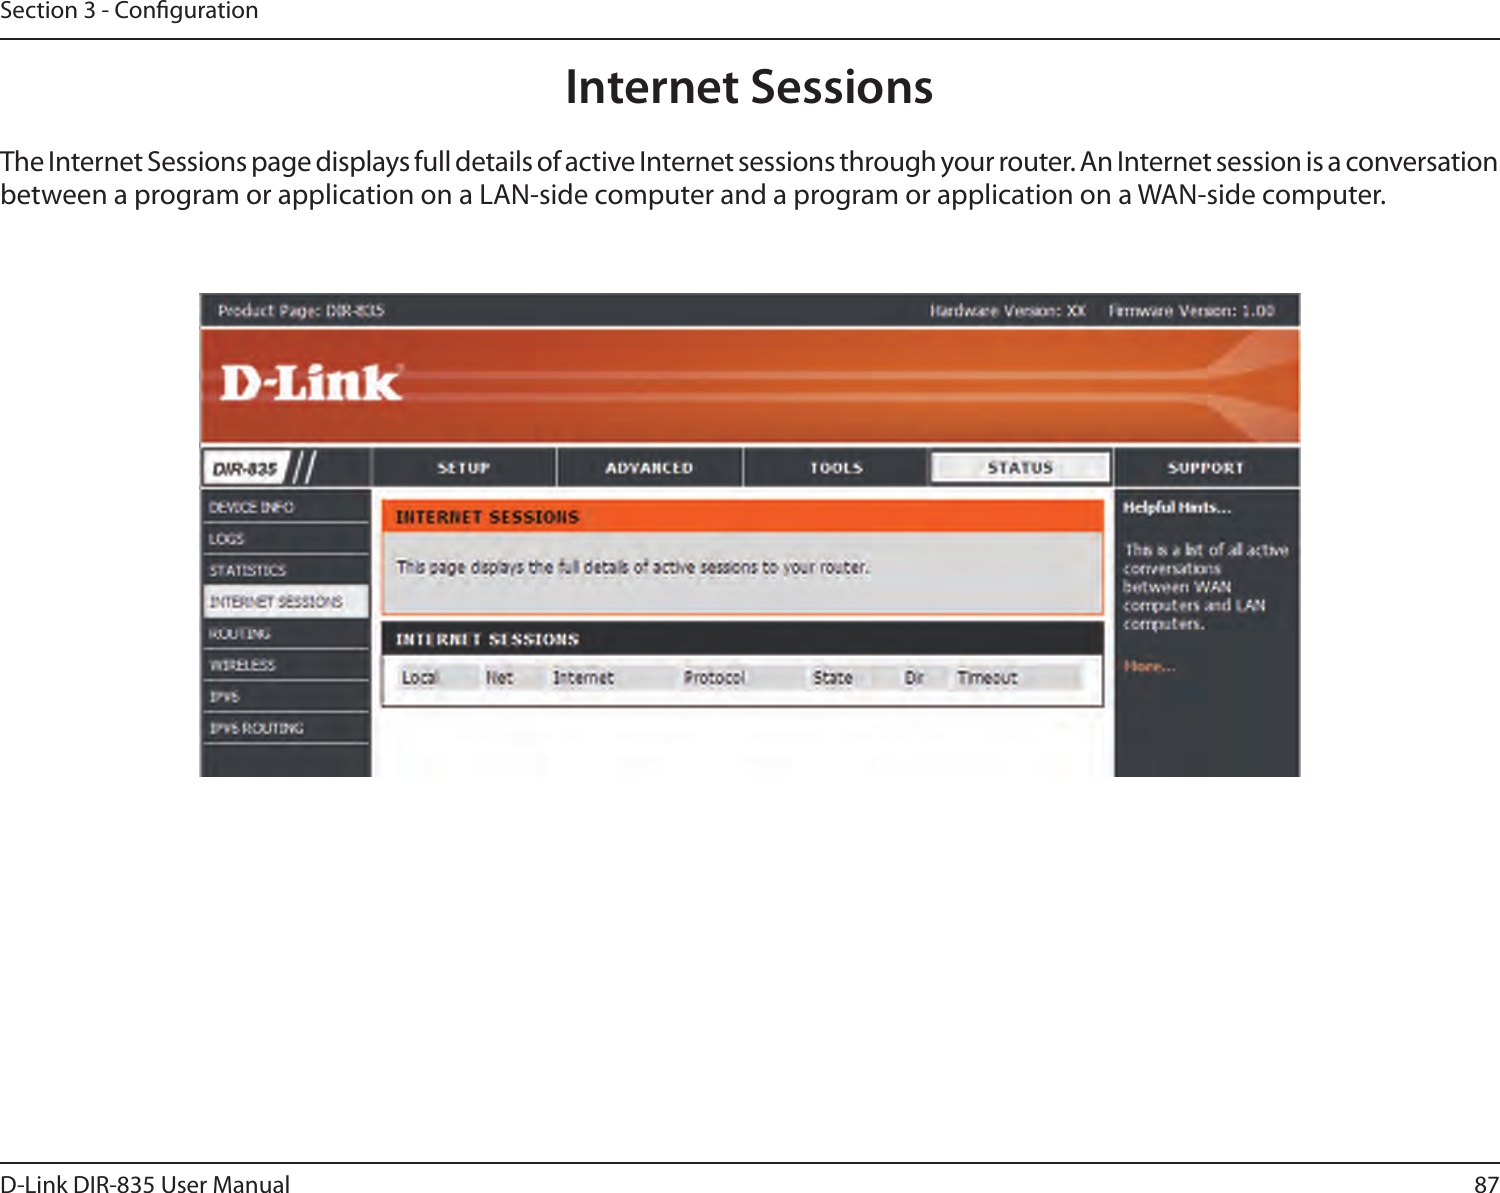 87D-Link DIR-835 User ManualSection 3 - CongurationInternet SessionsThe Internet Sessions page displays full details of active Internet sessions through your router. An Internet session is a conversation between a program or application on a LAN-side computer and a program or application on a WAN-side computer. 